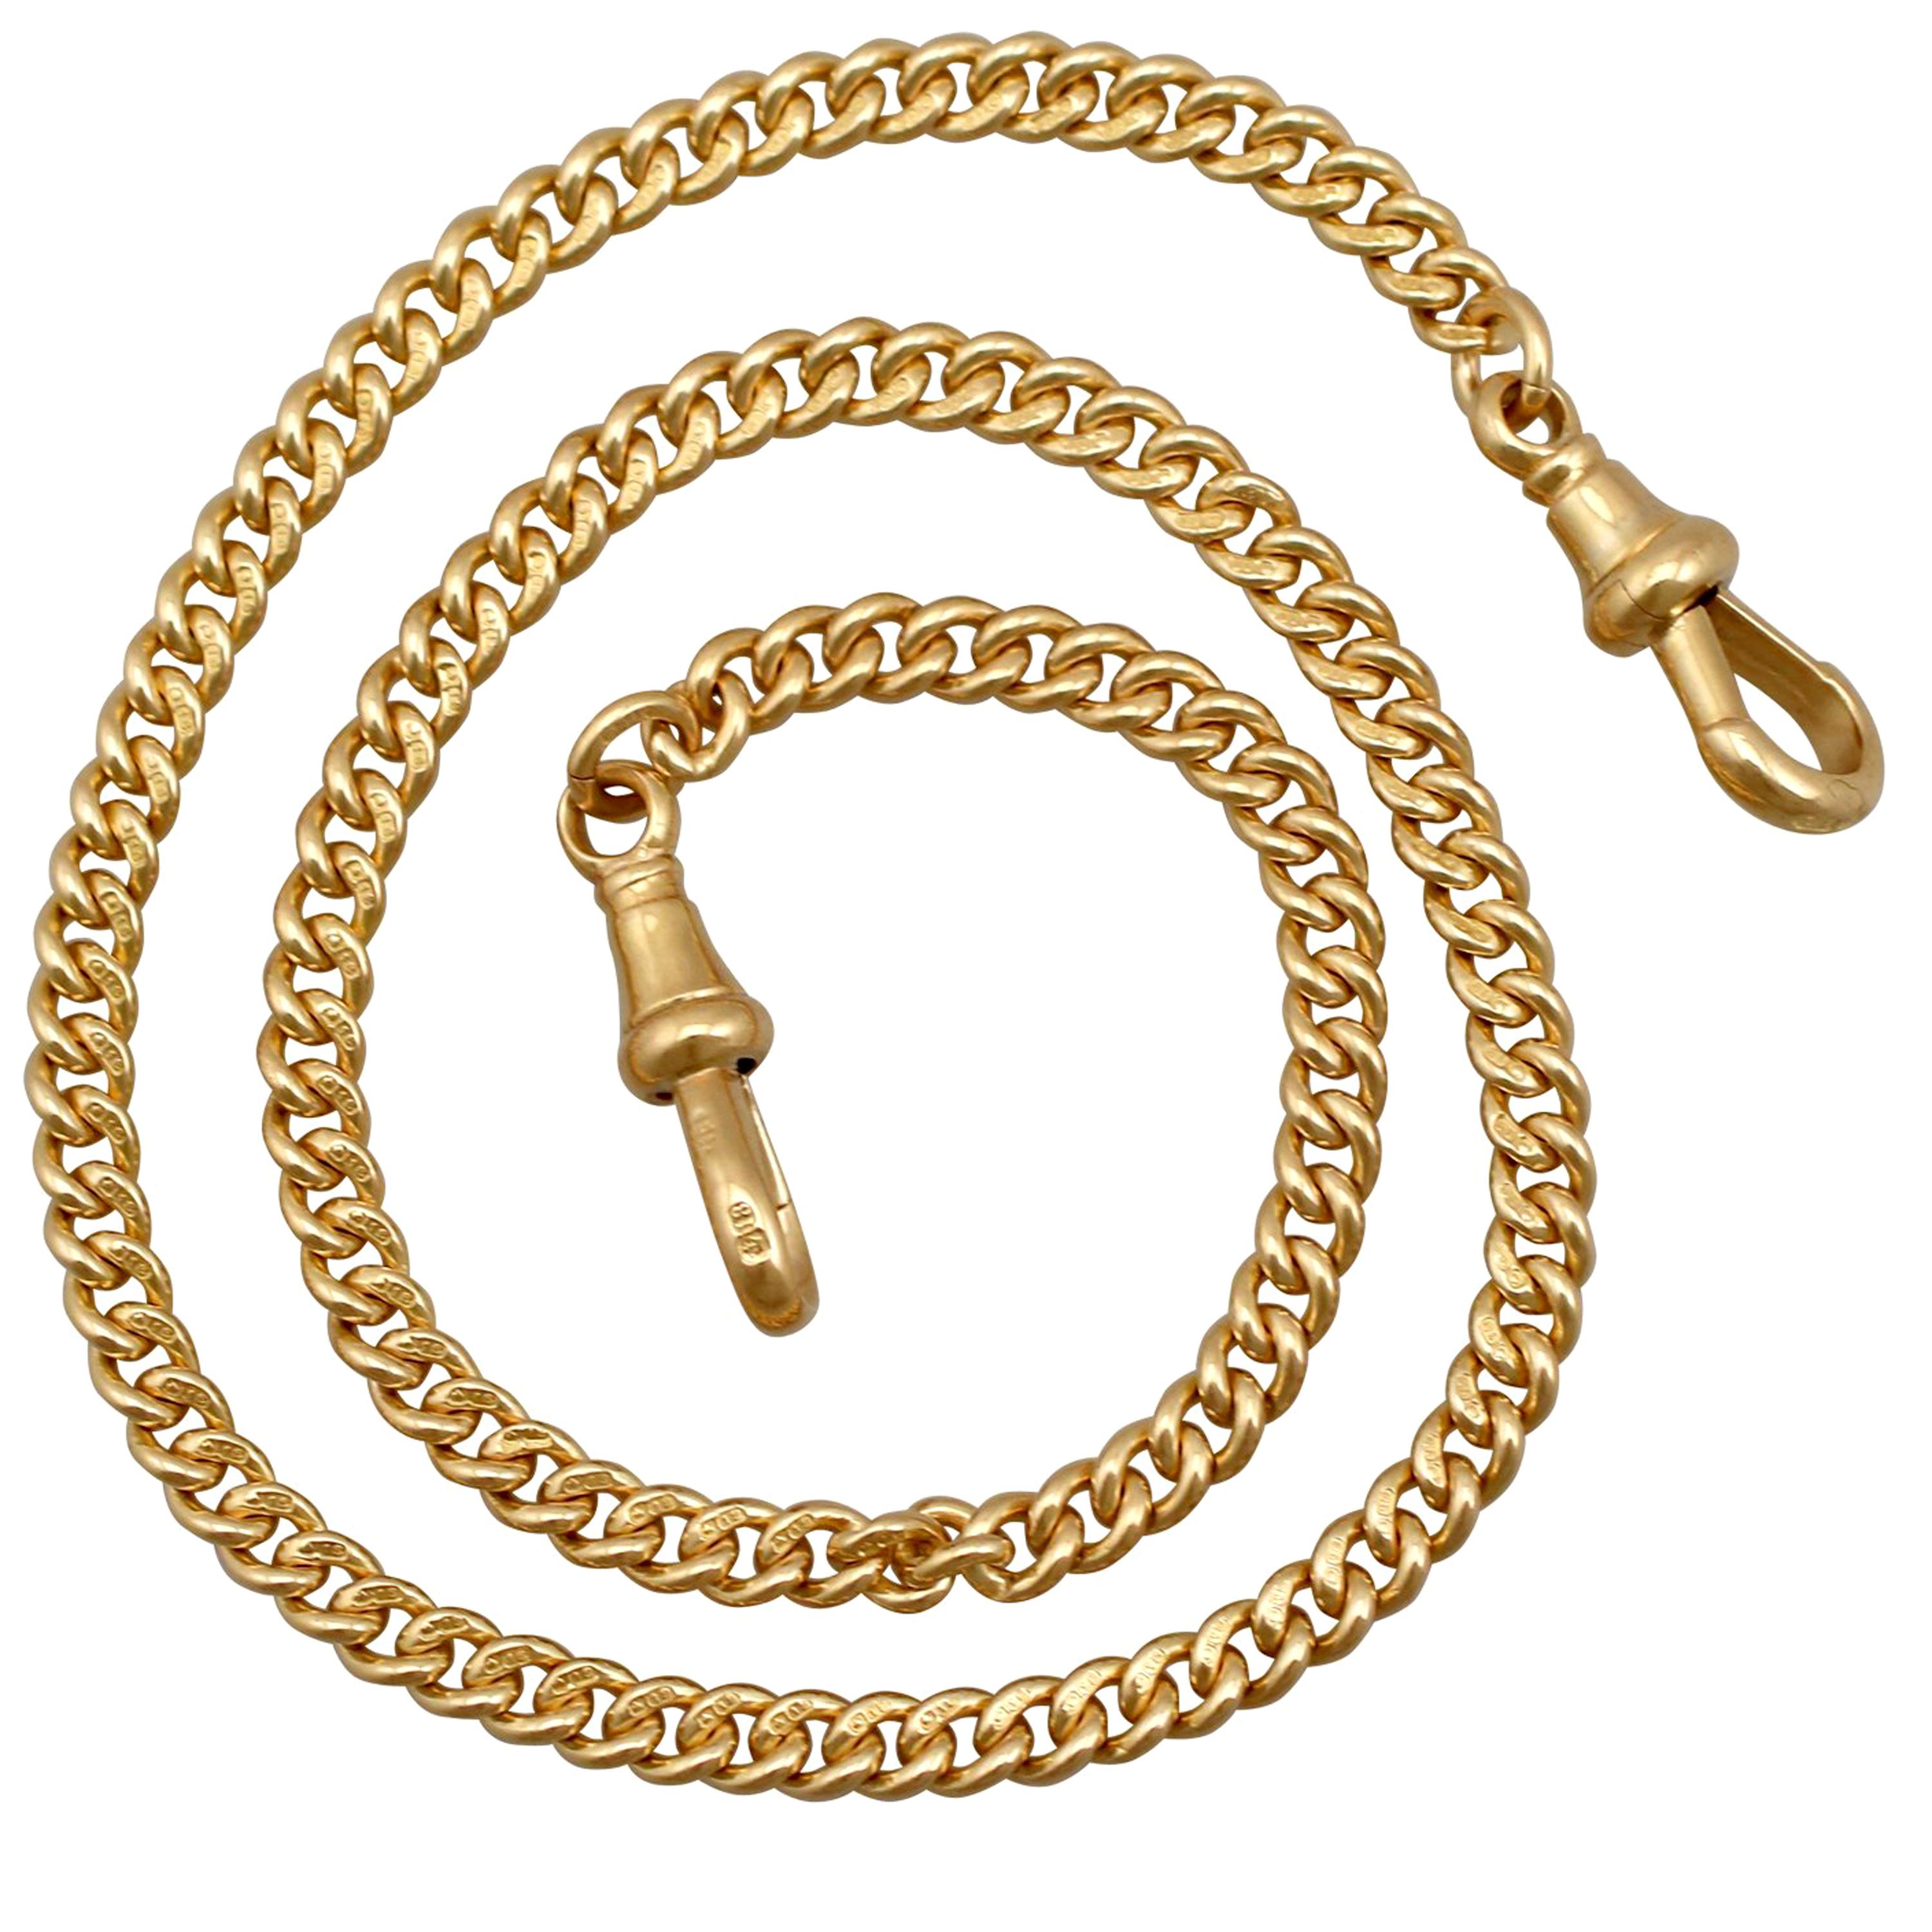 1900s Antique Fob Chain in Yellow Gold